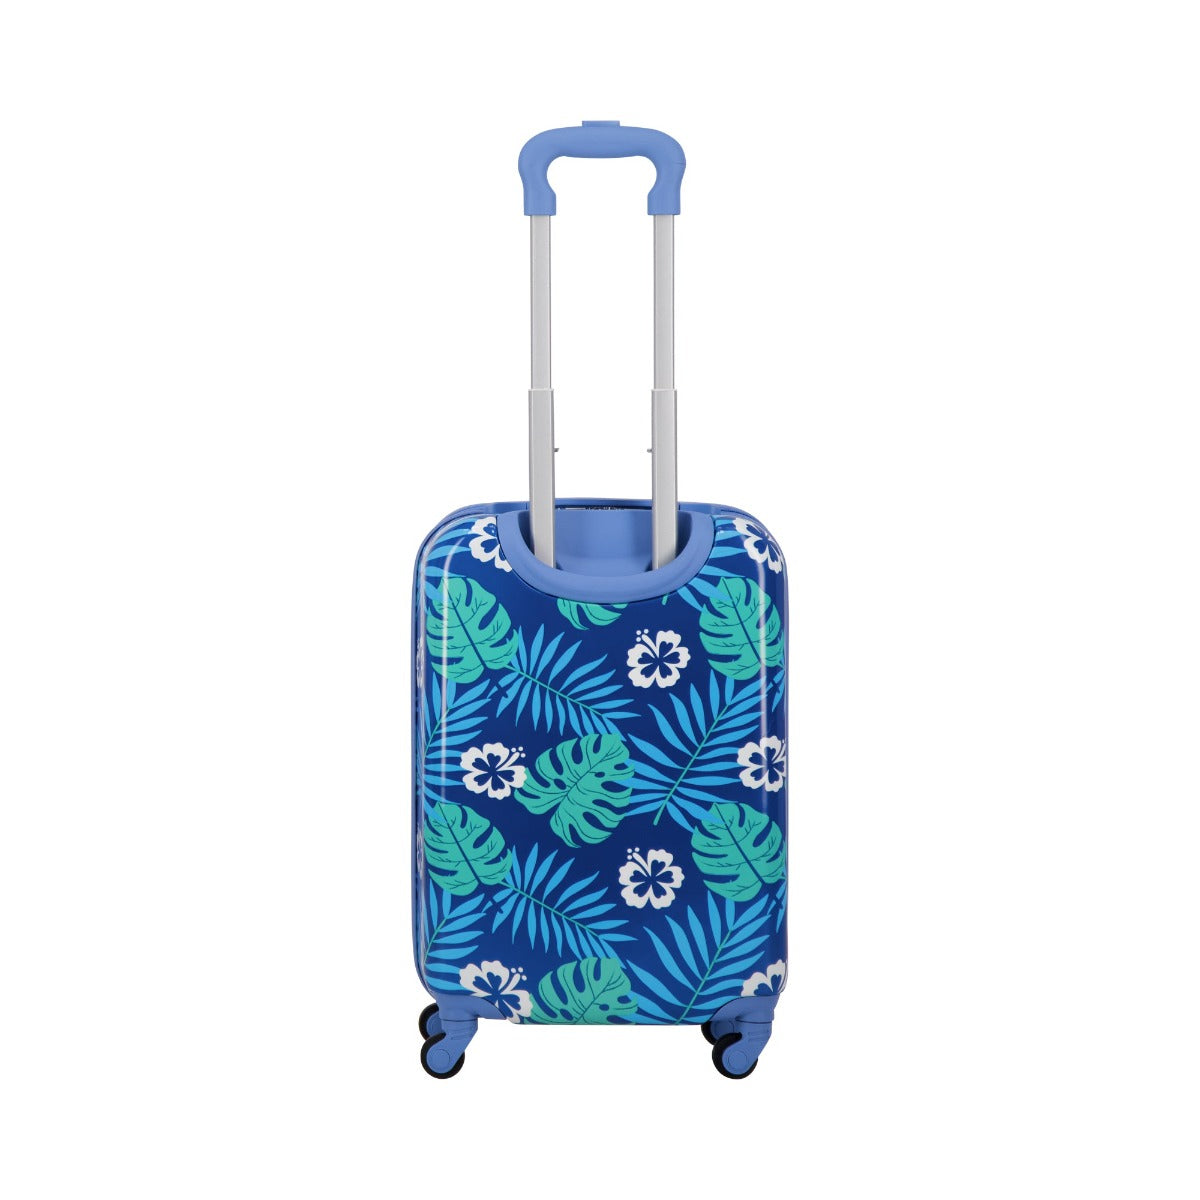 Blue Disney Ful Stitch tropical leaves - 21 inch carry-on suitcase for kids 